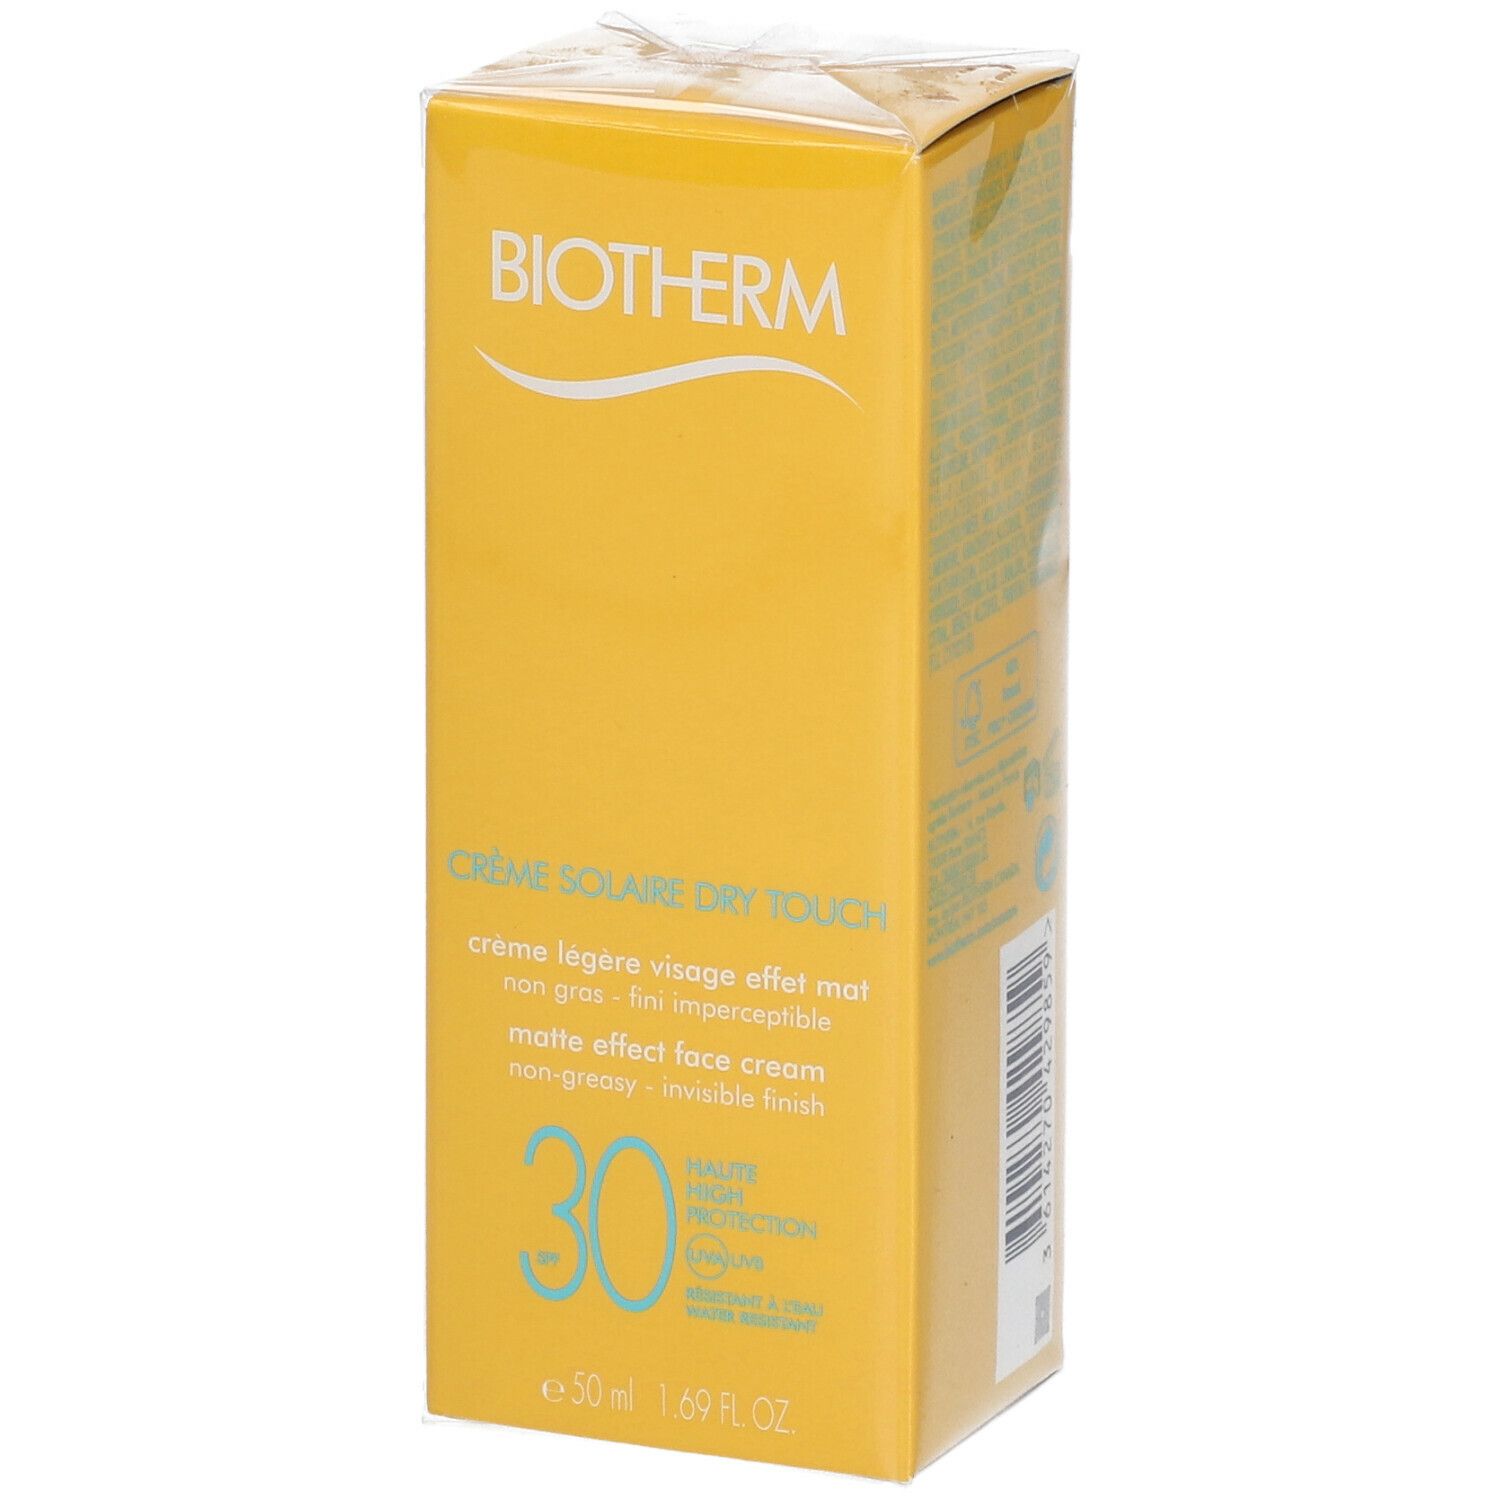 Biotherm Crème Solaire Dry Touch SPF 30